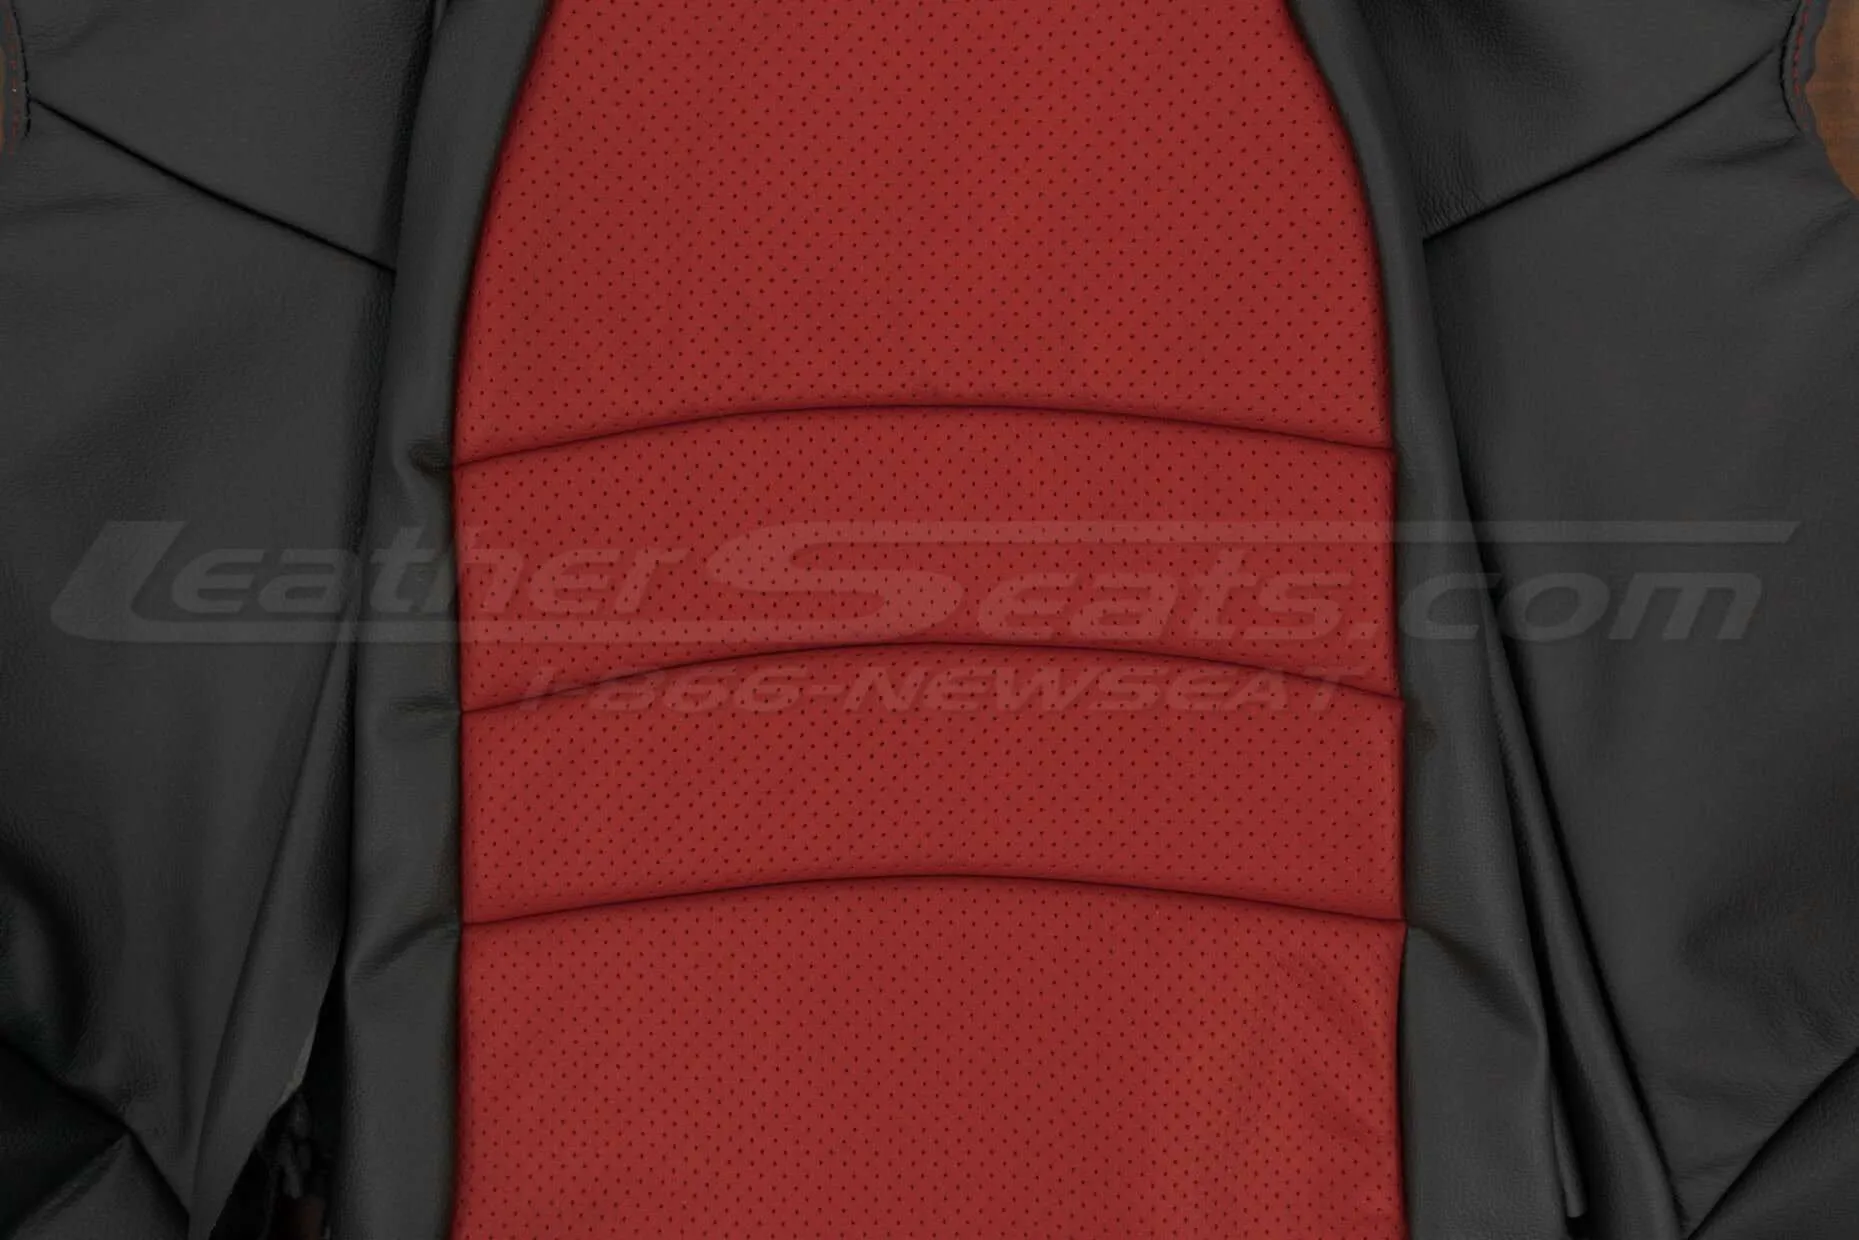 Honda S2000 Roadster Upholstery Kit - Black & Red - Perforated Combo